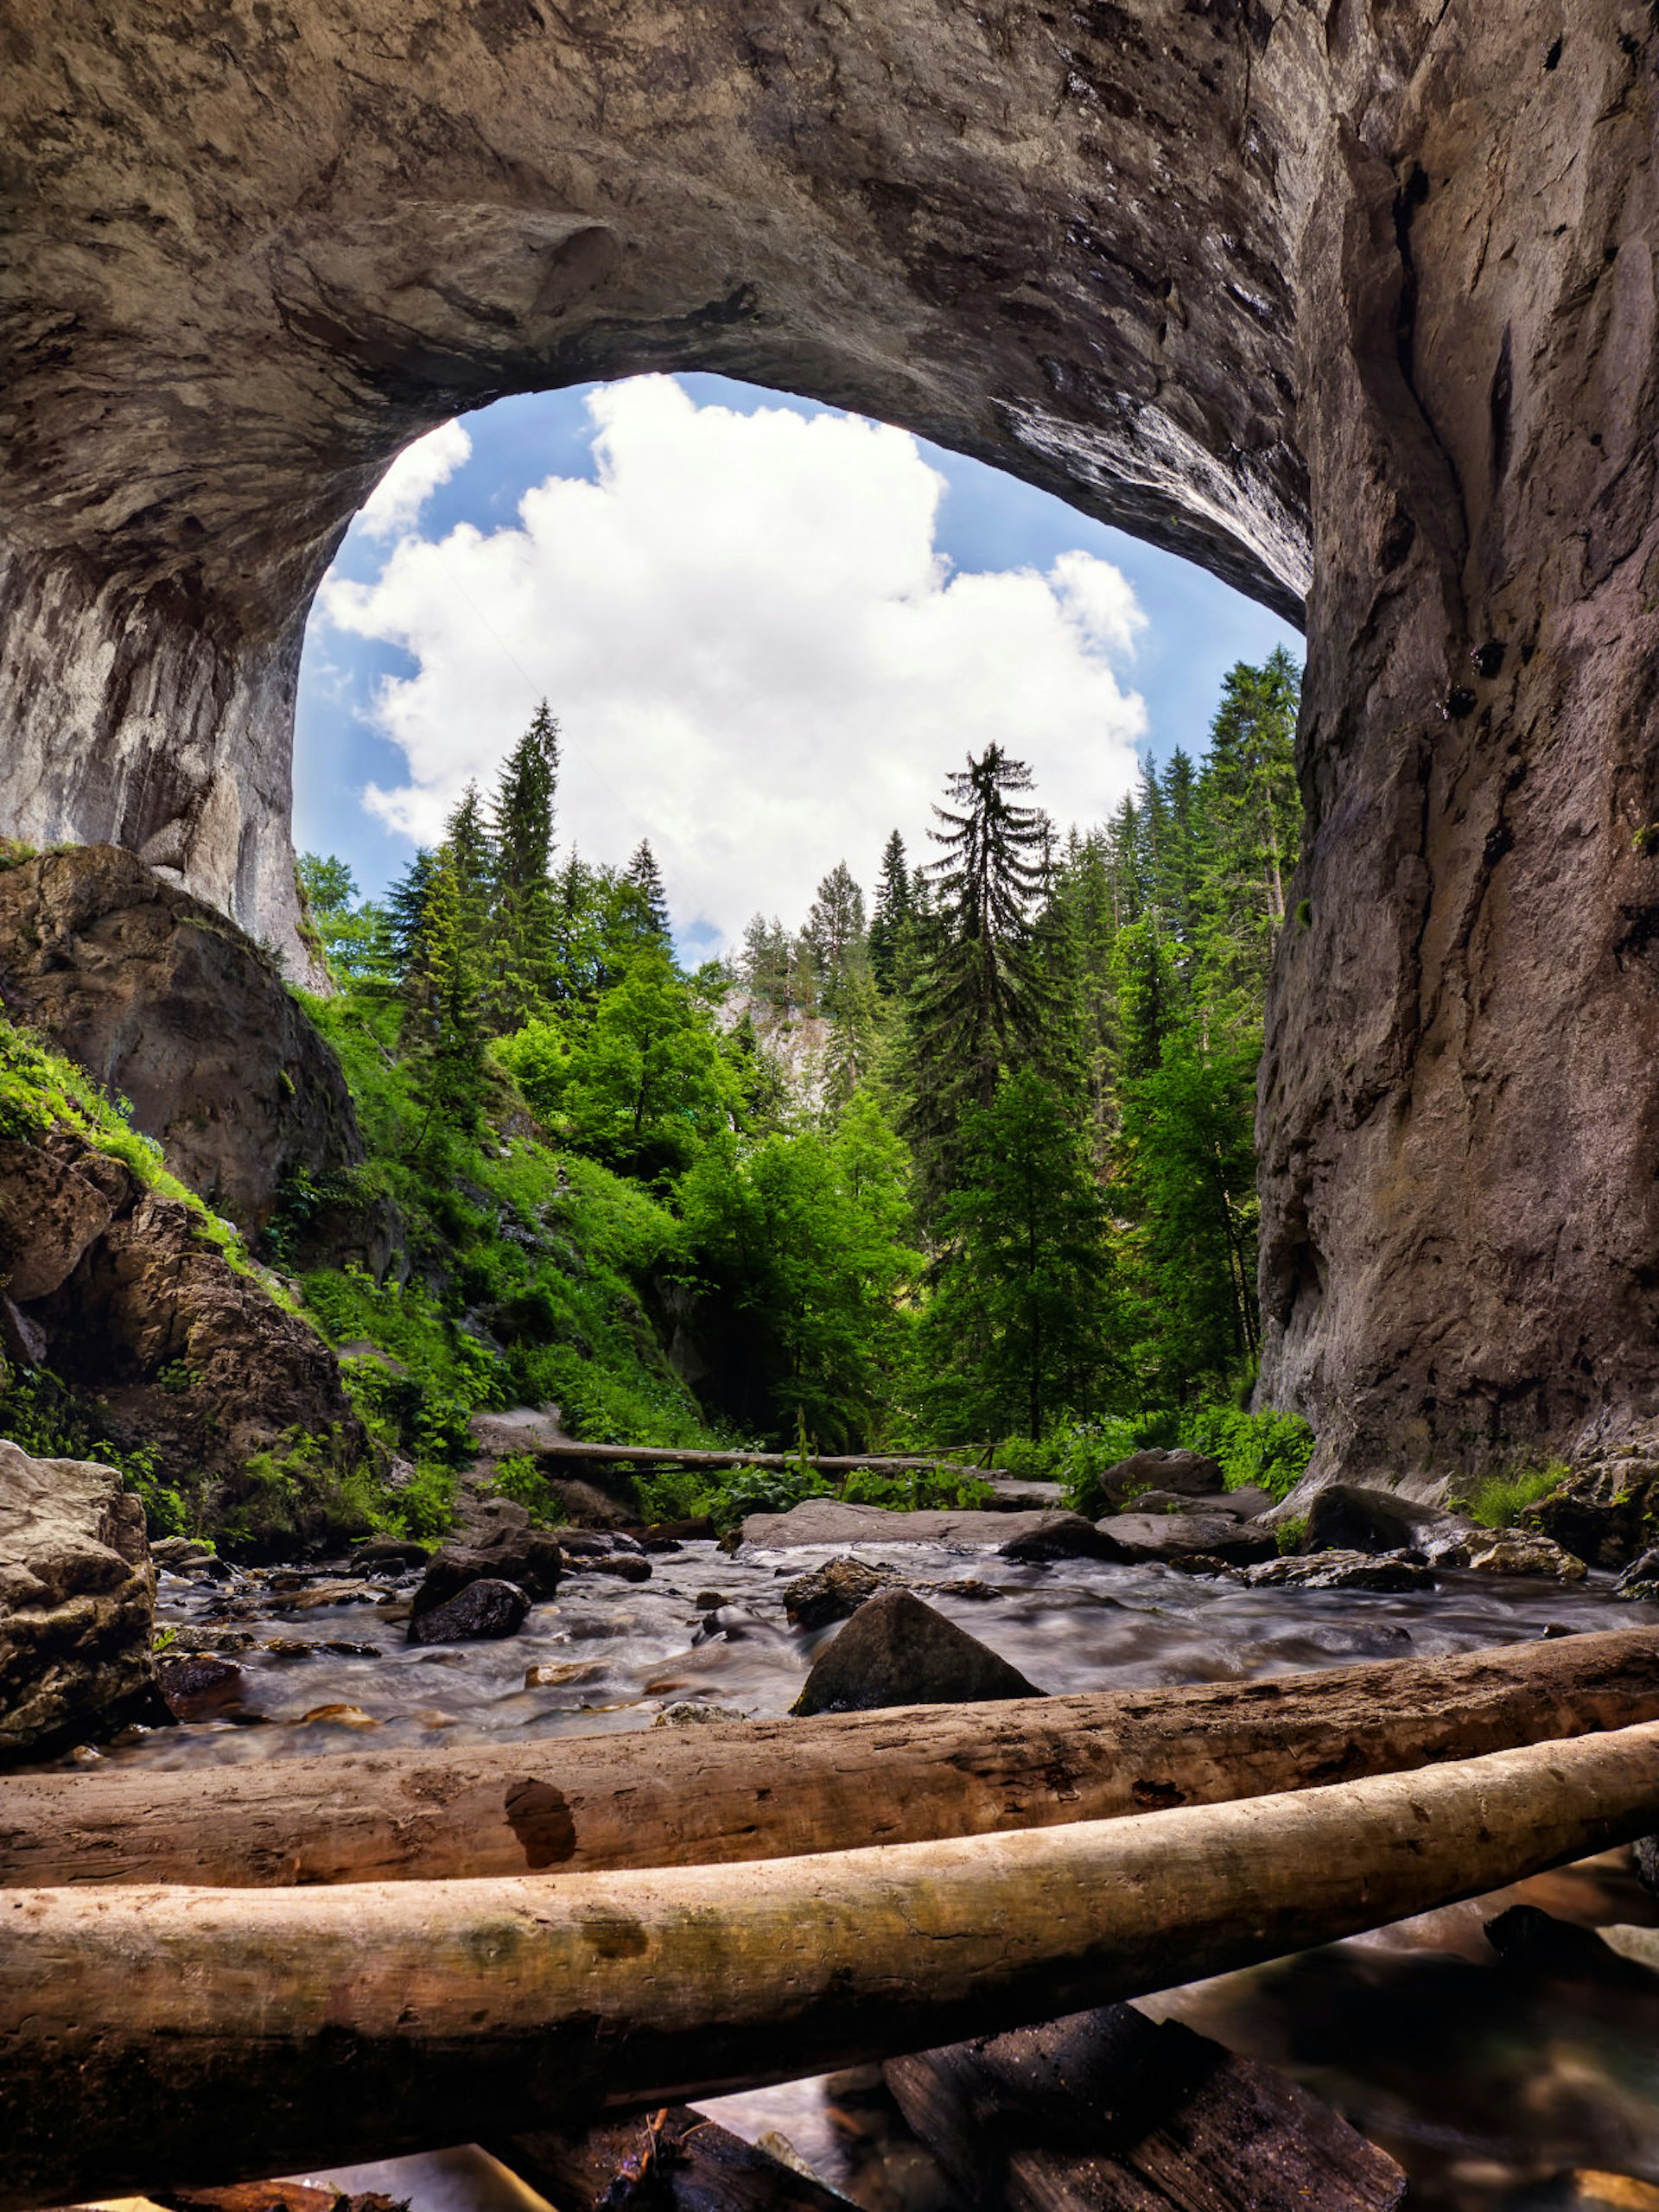  'Marvellous Bridges', the natural arches in Rodopi Mountains